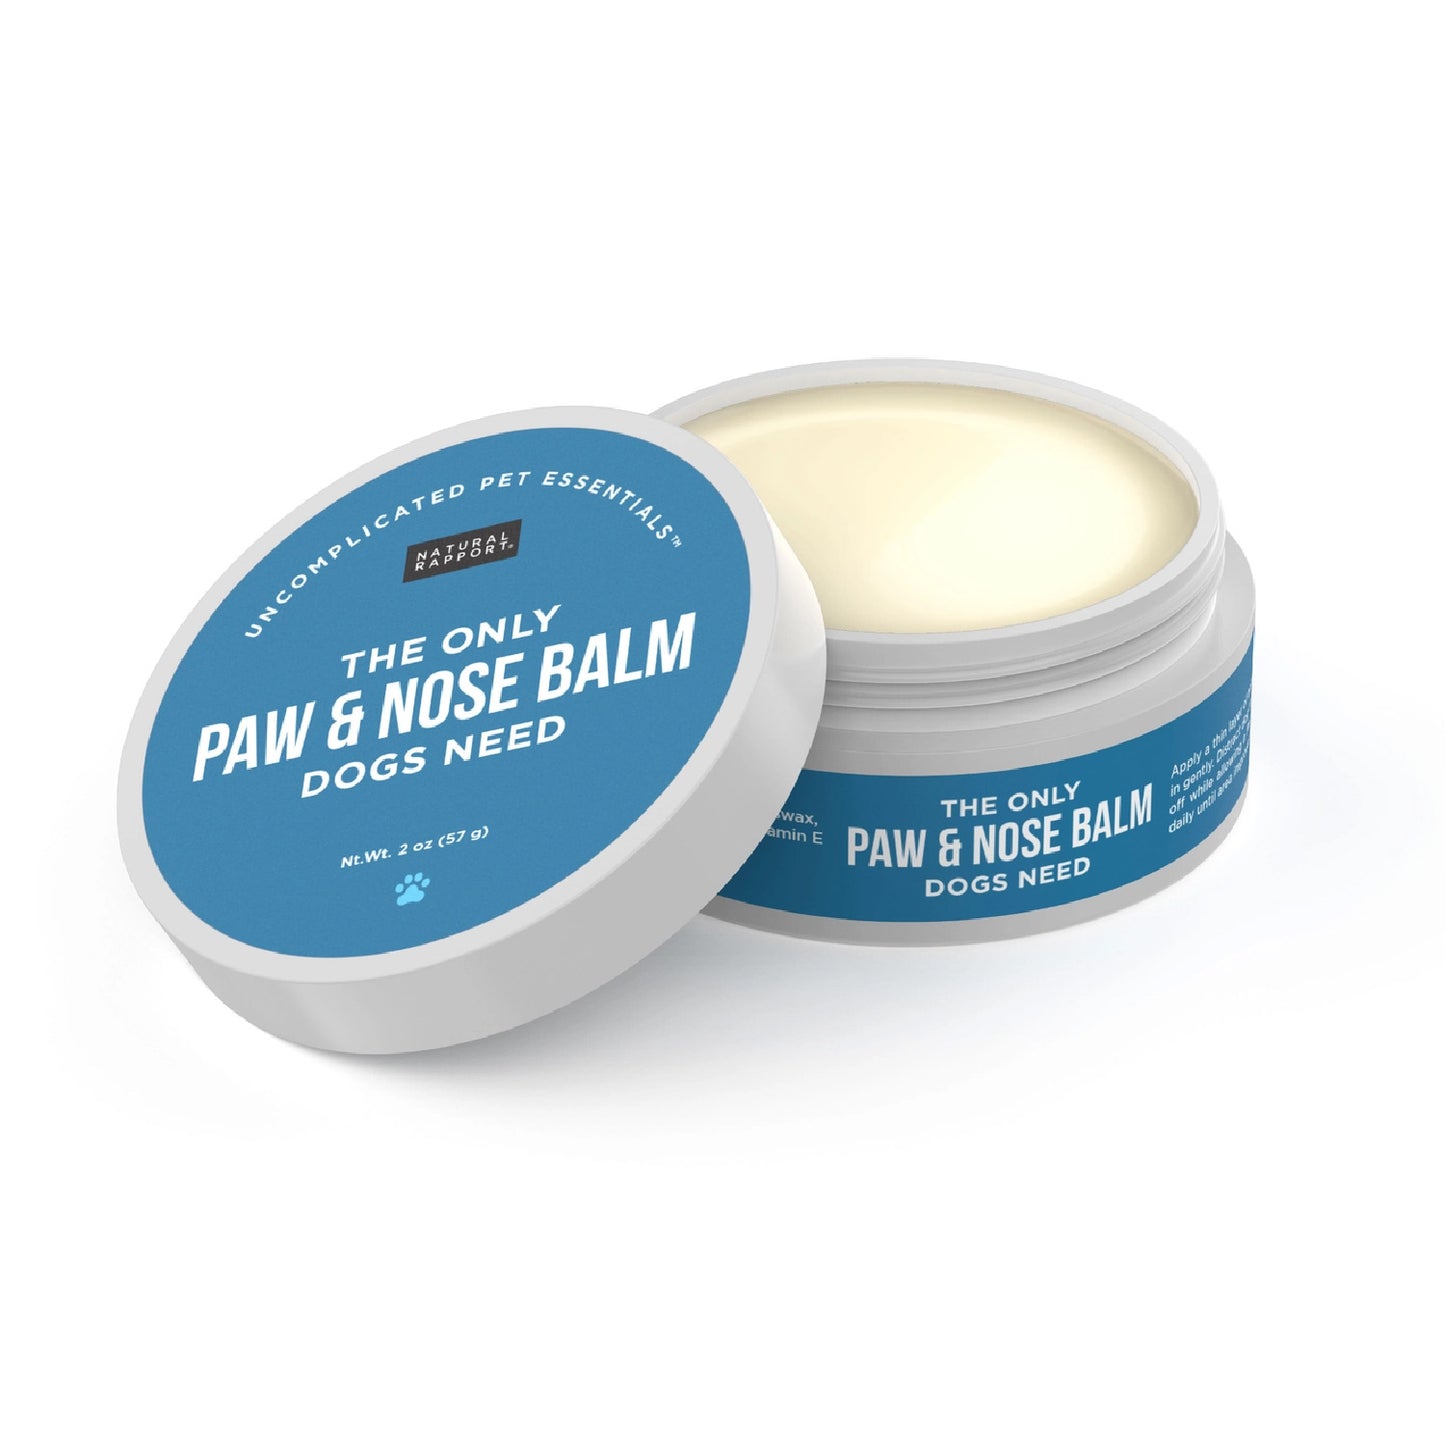 The Only Paw and Nose Balm Dogs Need